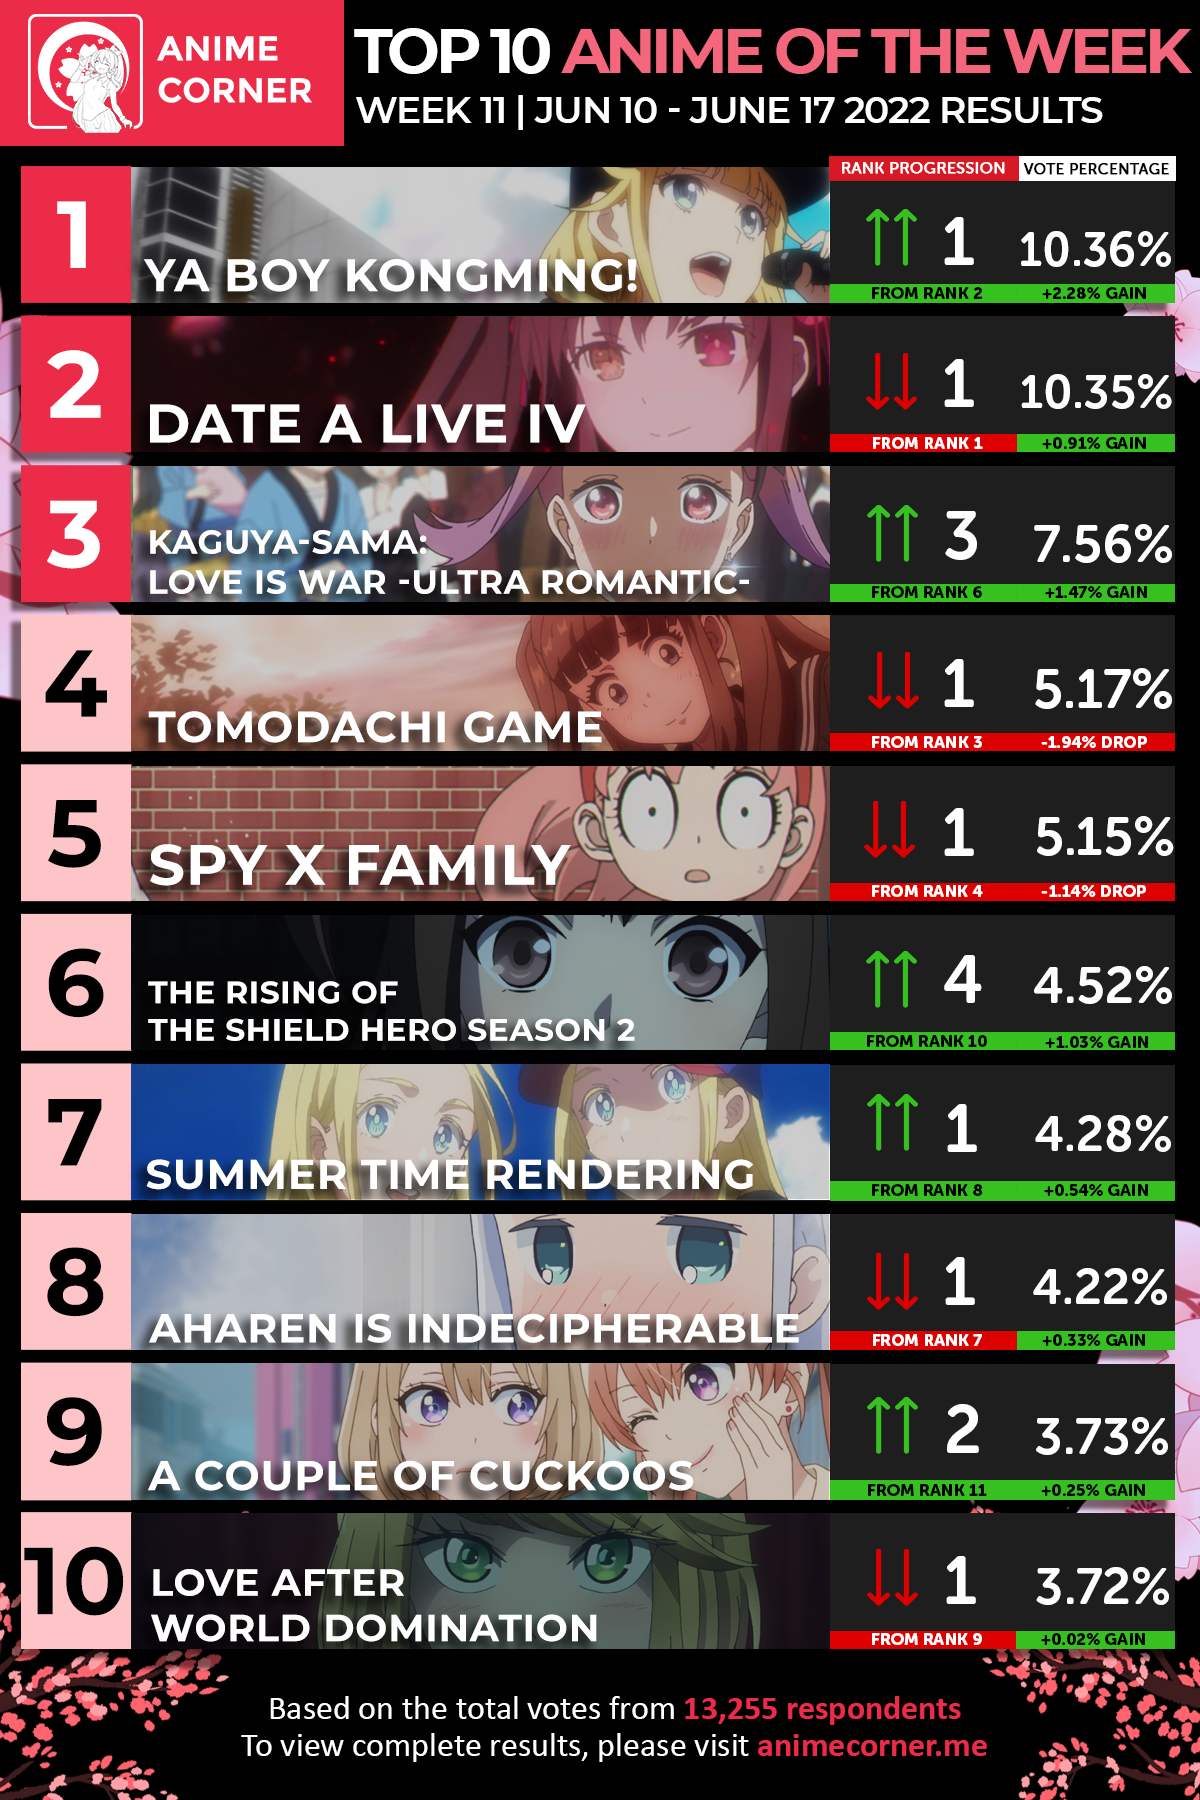 Top 10 Anime of the Week 11 Spring 2022